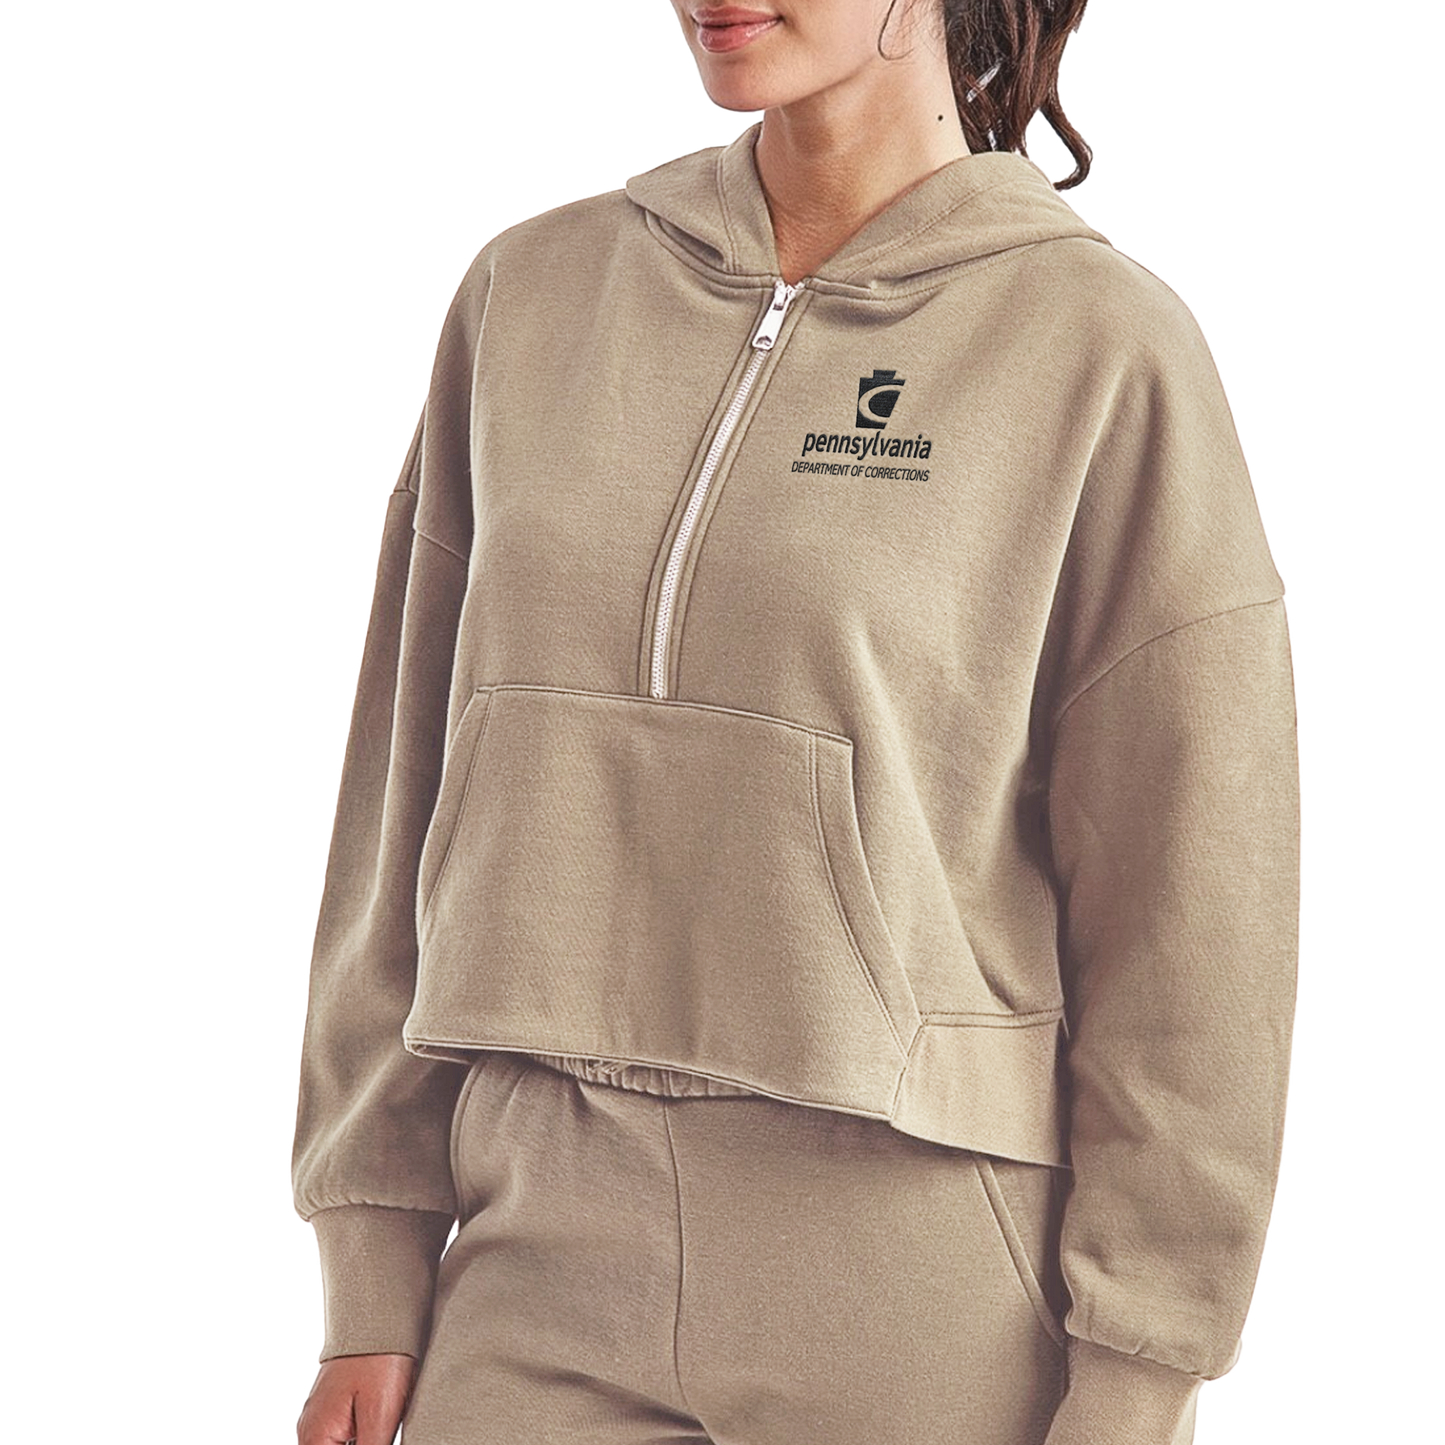 Ladies' Half-Zip Hooded Sweatshirt with Embroidered Department of Corrections Logos (Various Colors)